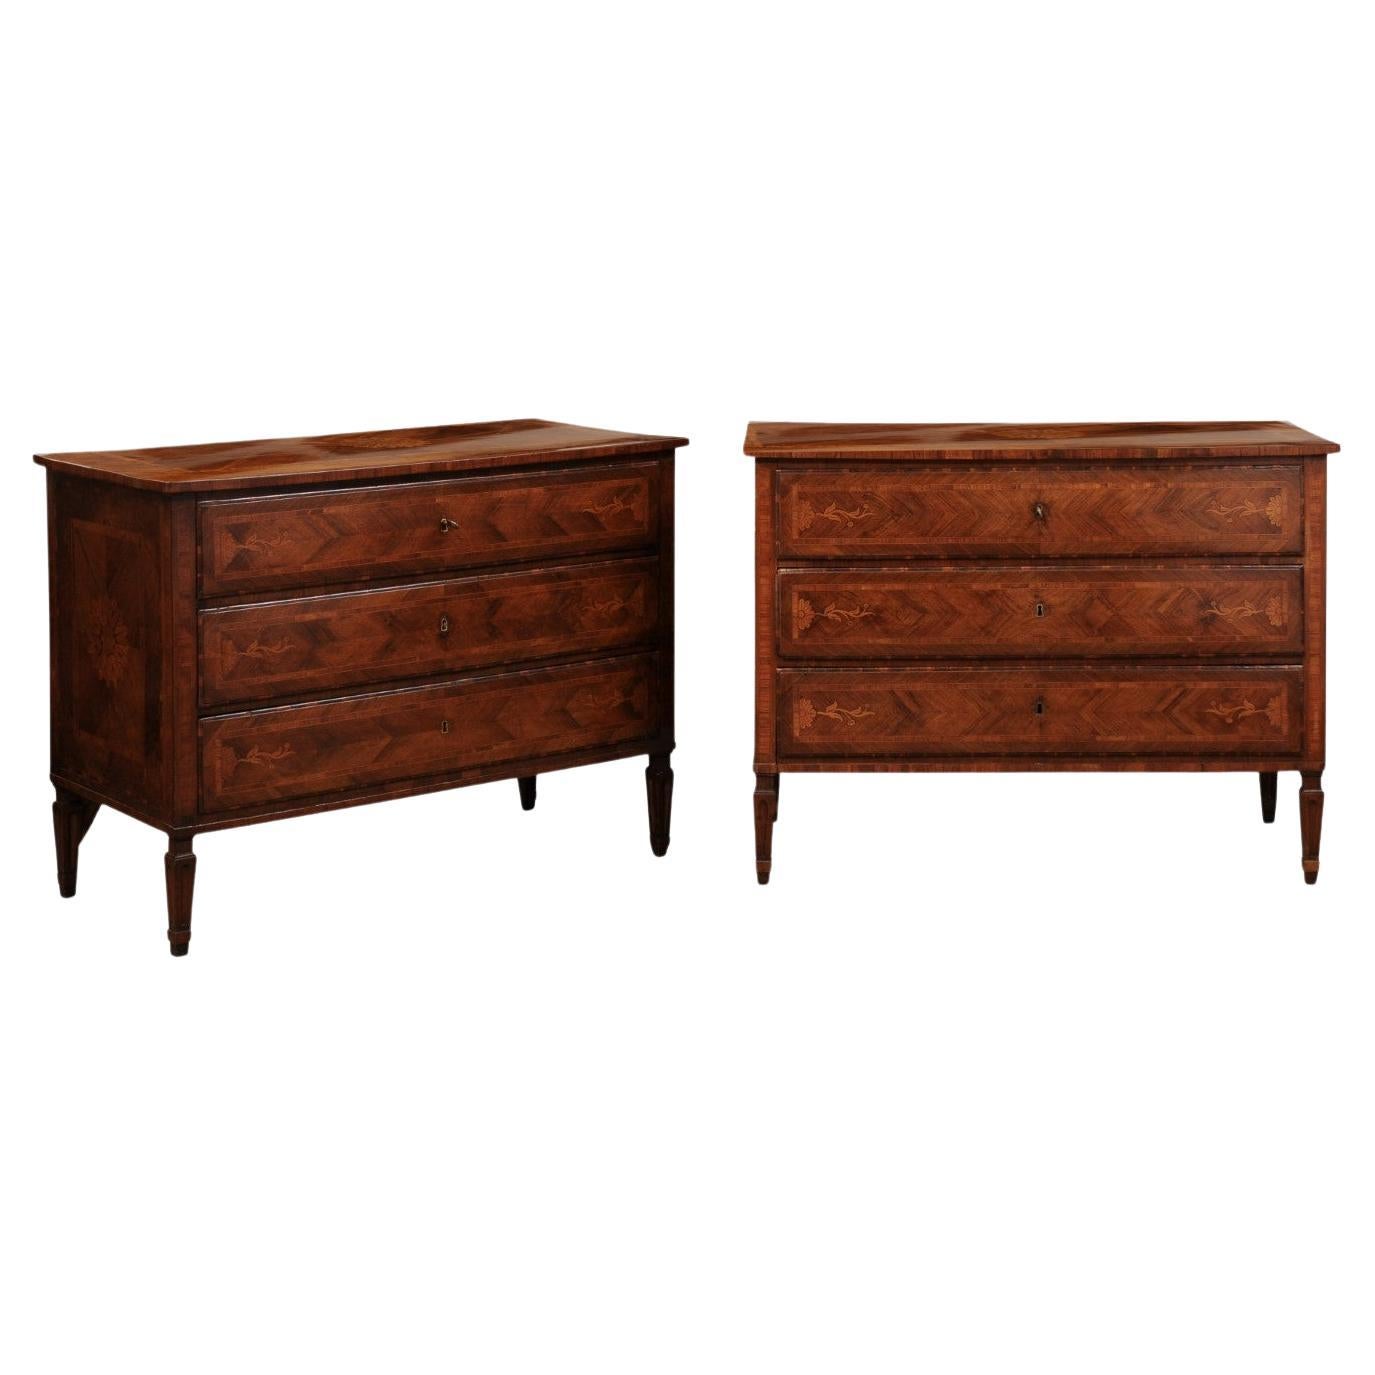 Pair of Italian Neoclassical Walnut Commodes with Foliage Design, 19th Century